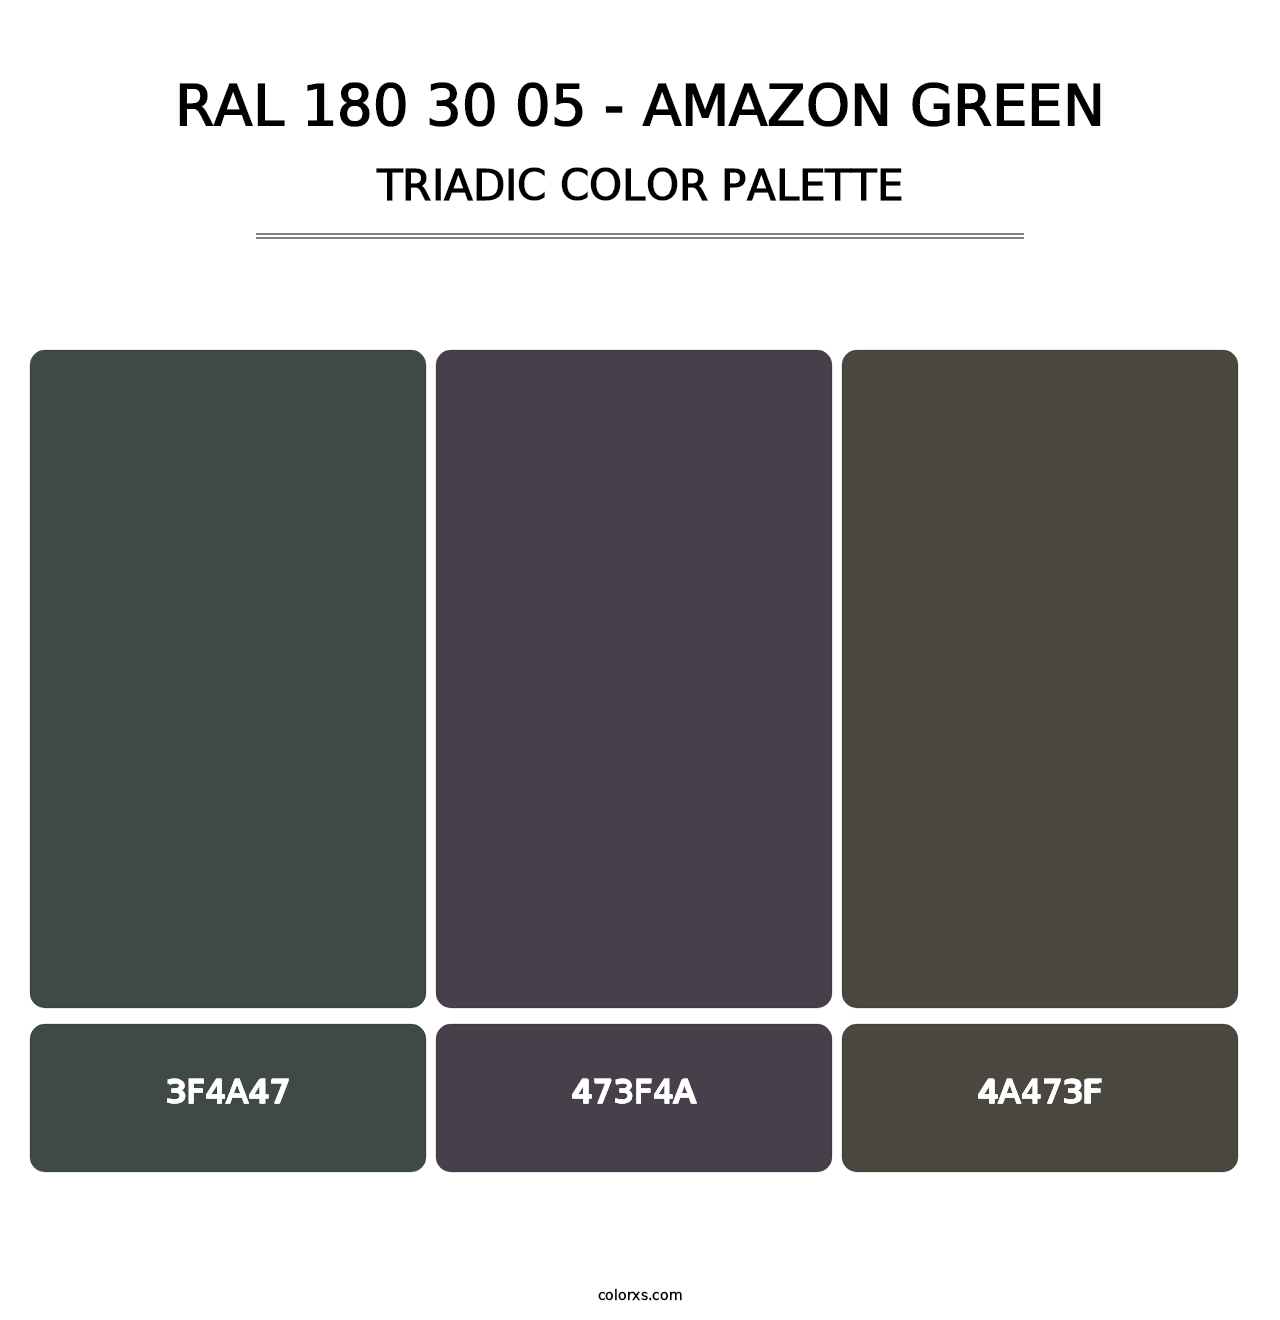 RAL 180 30 05 - Amazon Green - Triadic Color Palette